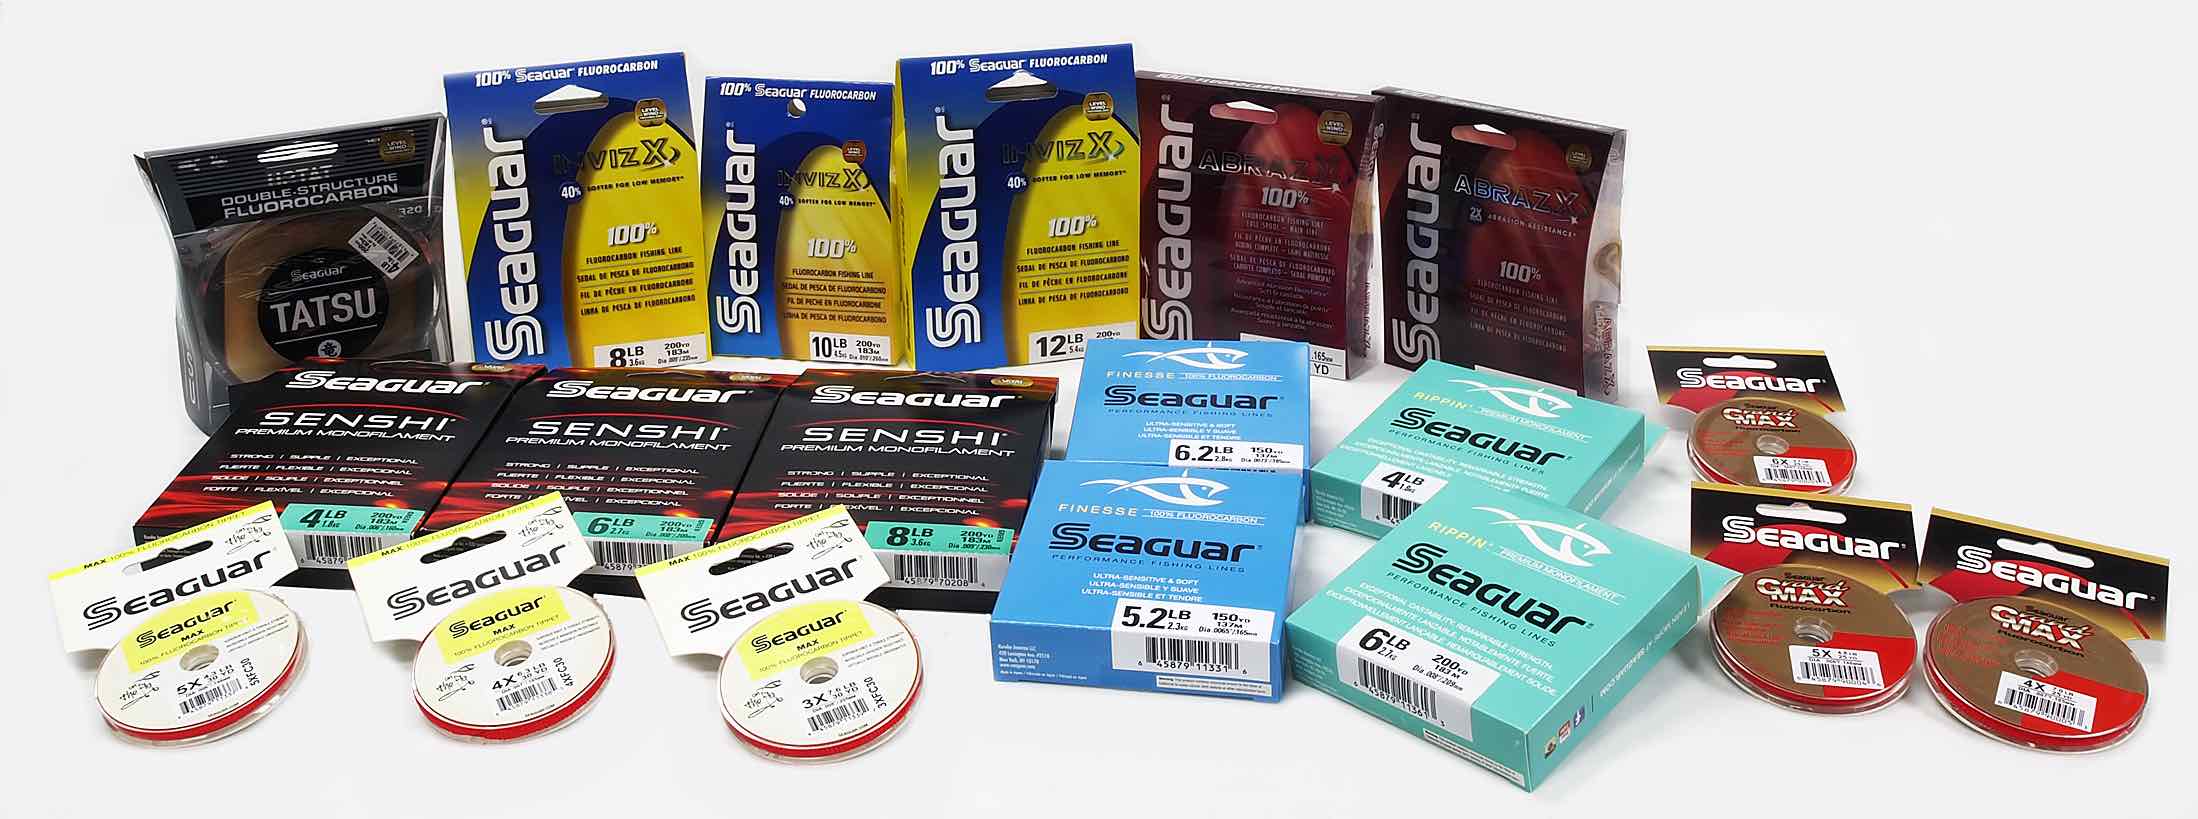 Seaguar Finesse Fluorocarbon Fishing Line & Tippet Material – The